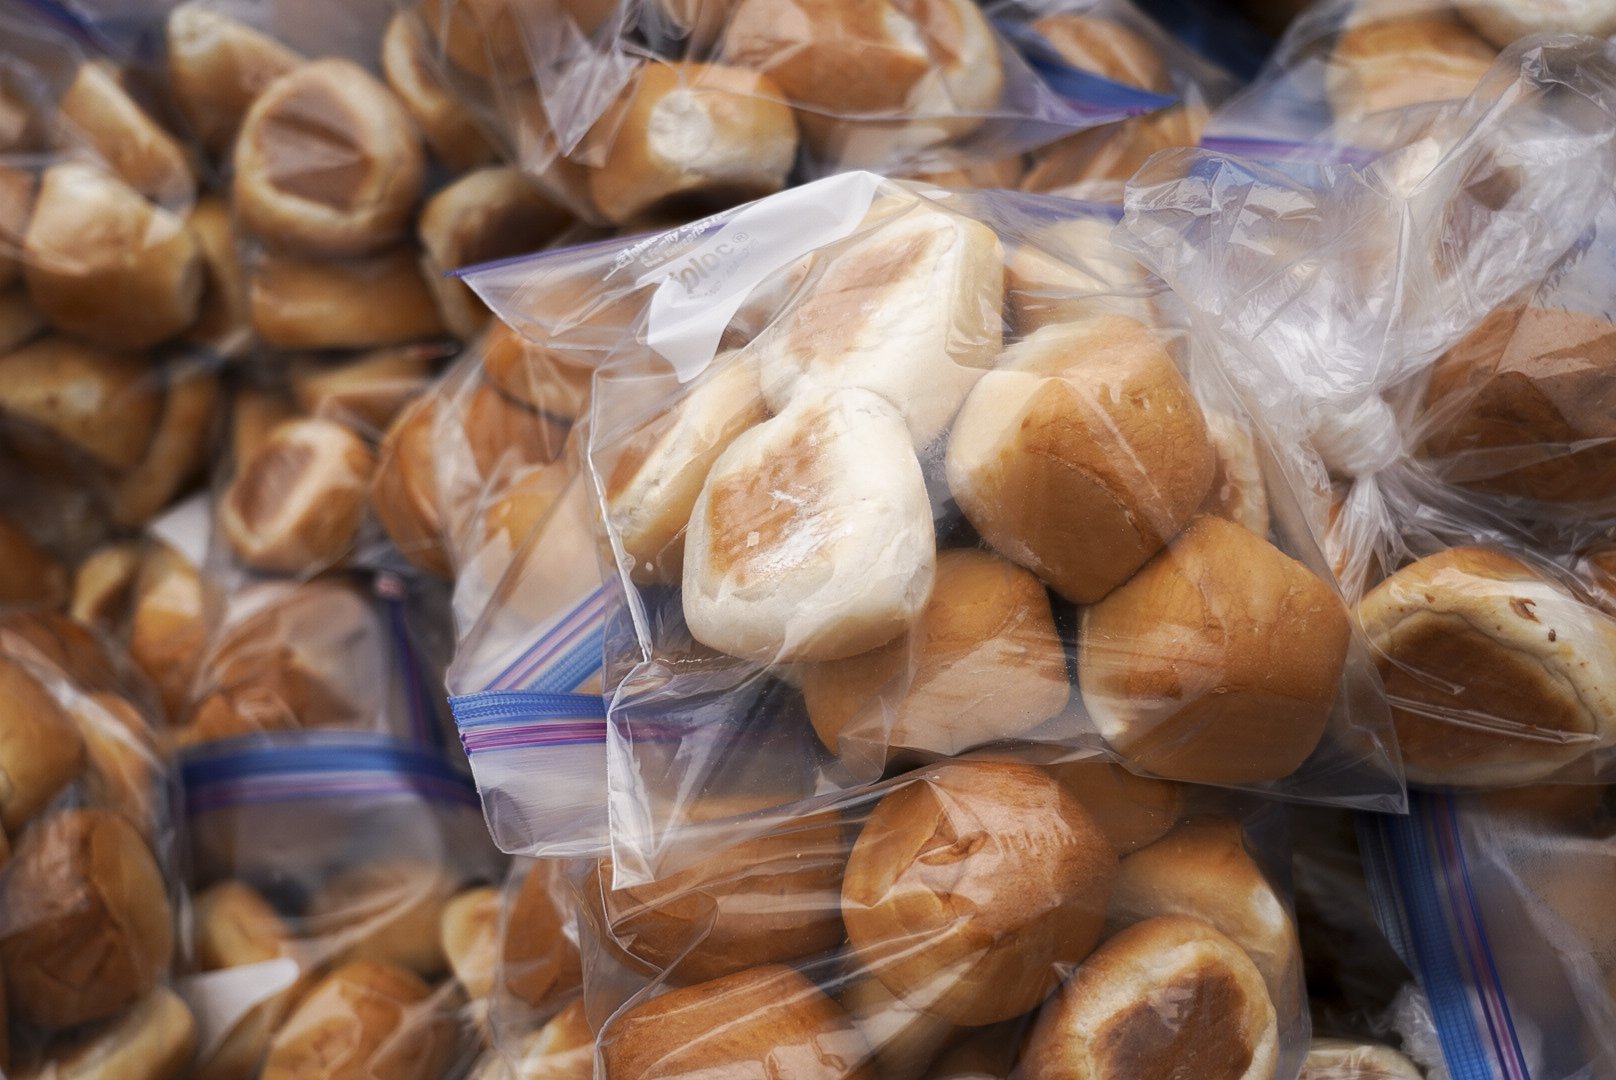  Diner rolls await packaging during Santa Monica College's 3rd Giving Thanks(Giving) charity food distribution event Tuesday, Nov. 22 2022. The drive-thru market featured free care packages designed to ease the burden faced by food-insecure students.